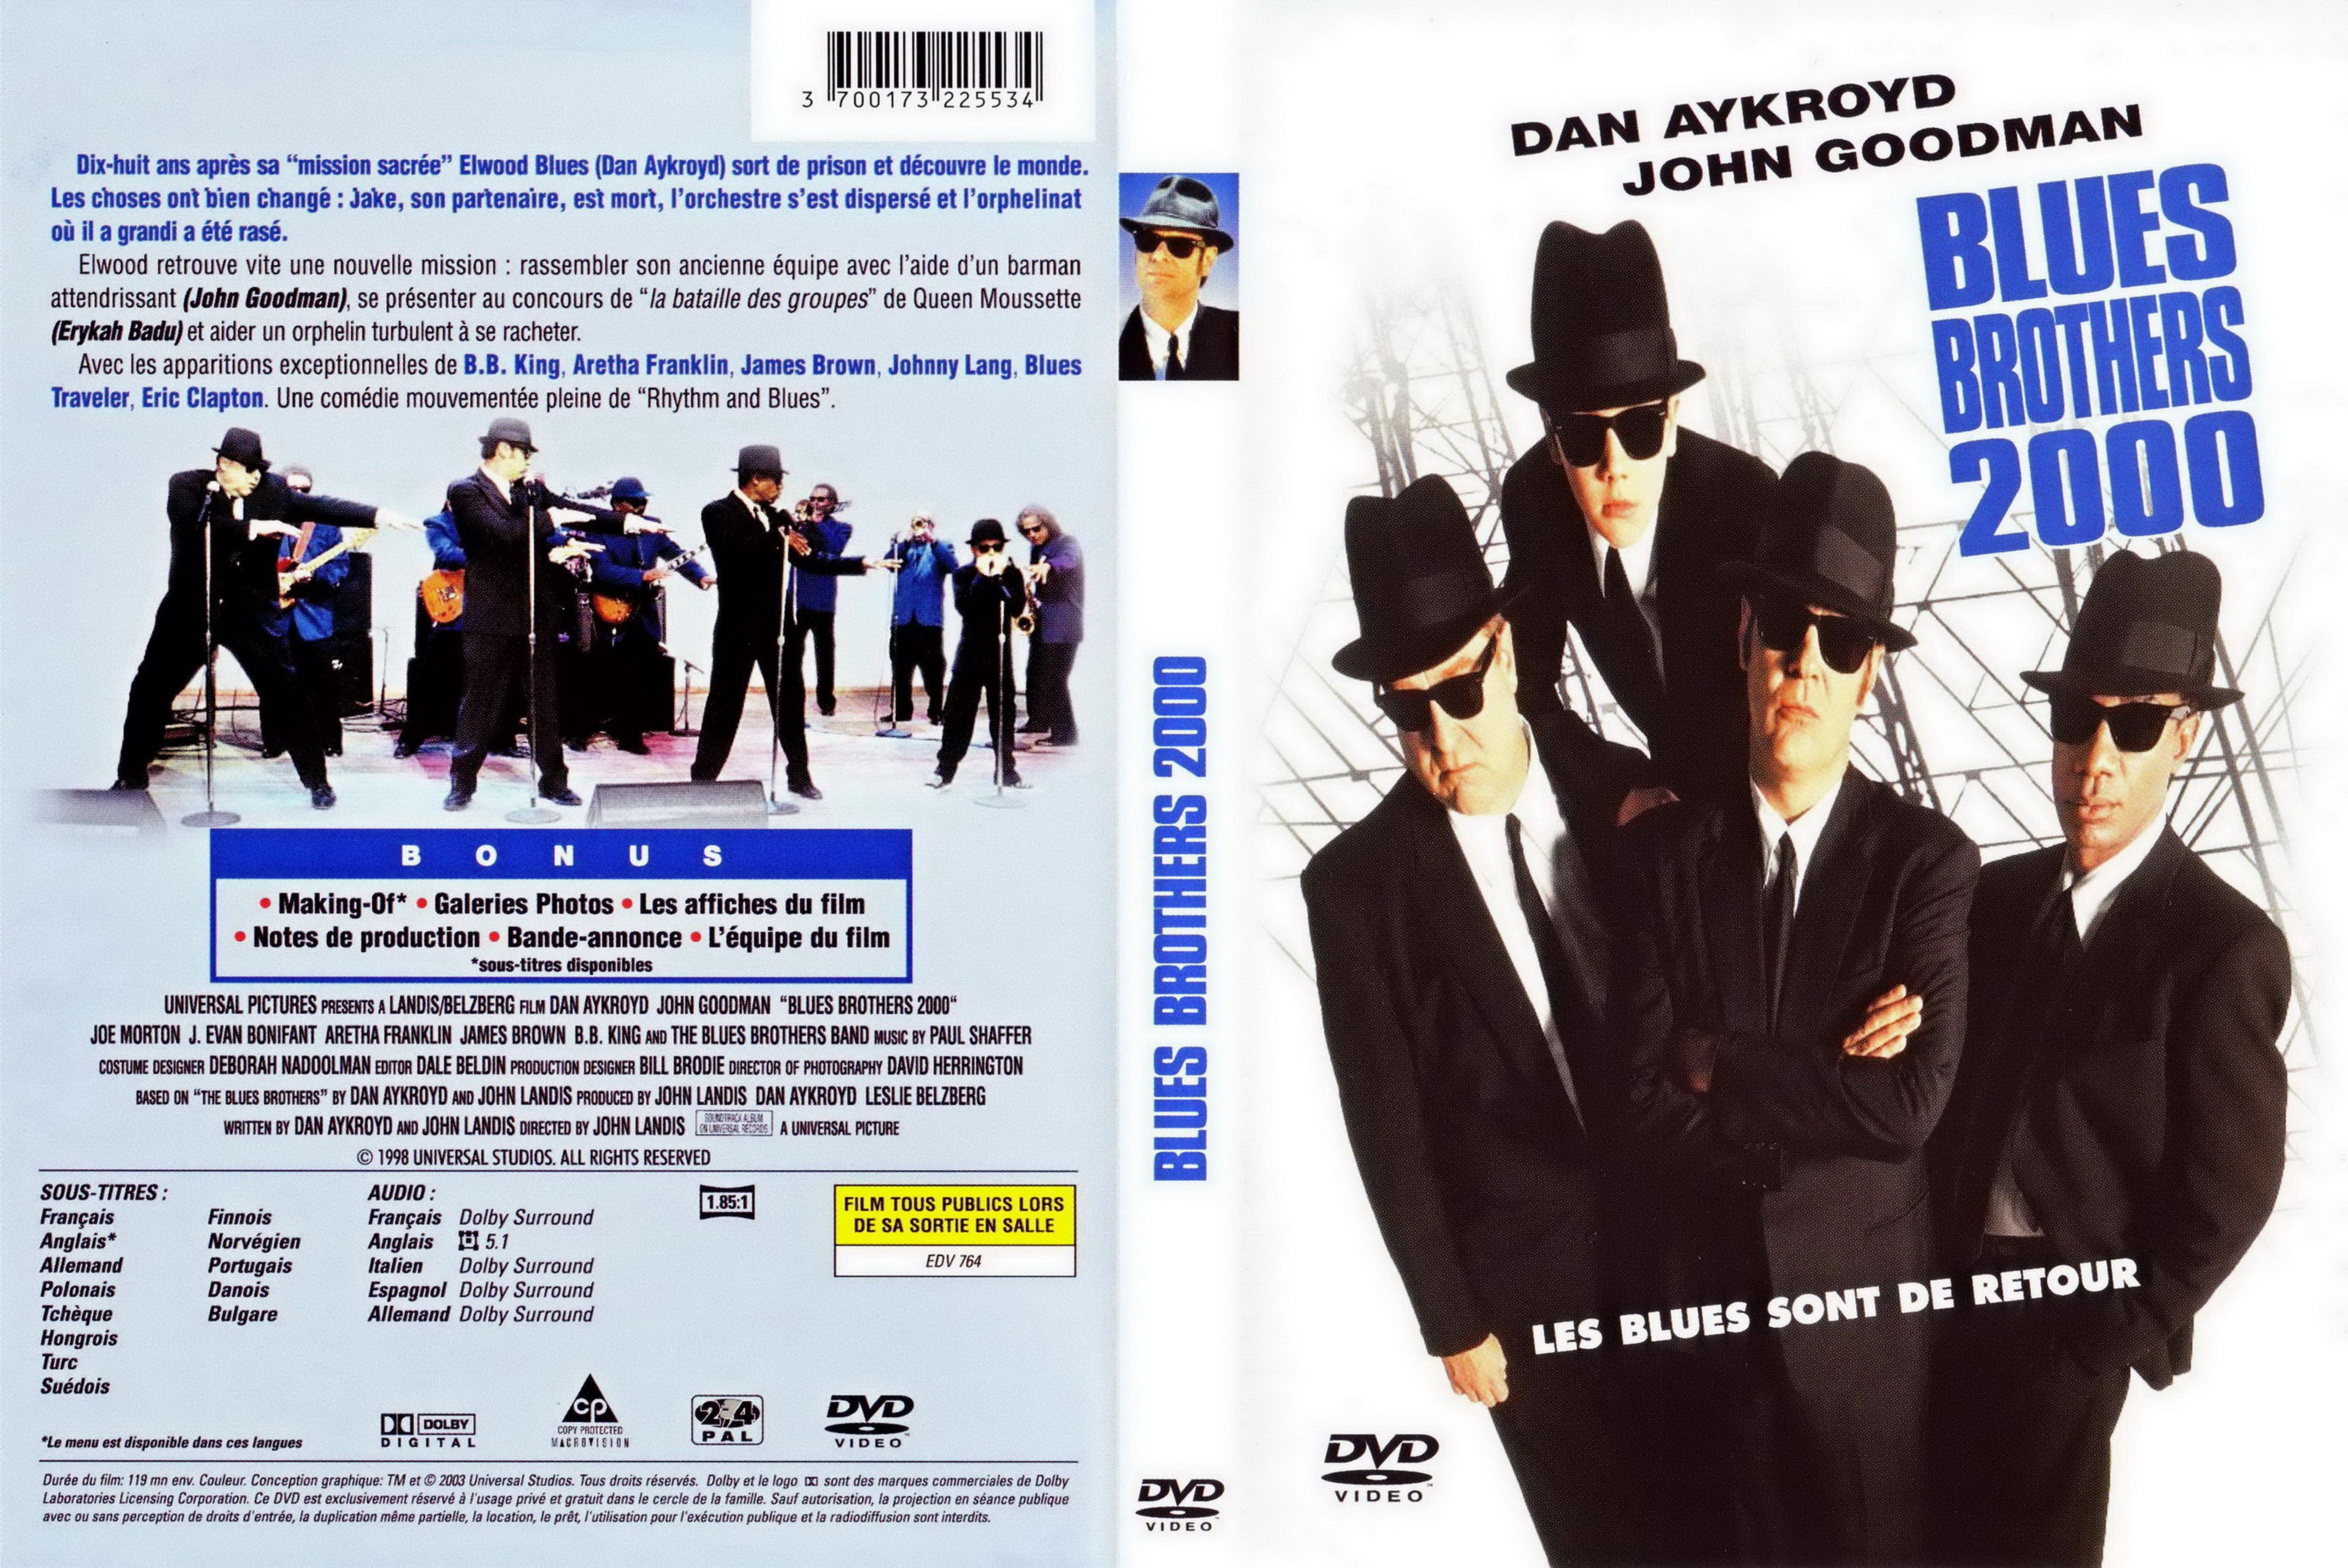 Jaquette DVD Blues Brothers 2000 v2